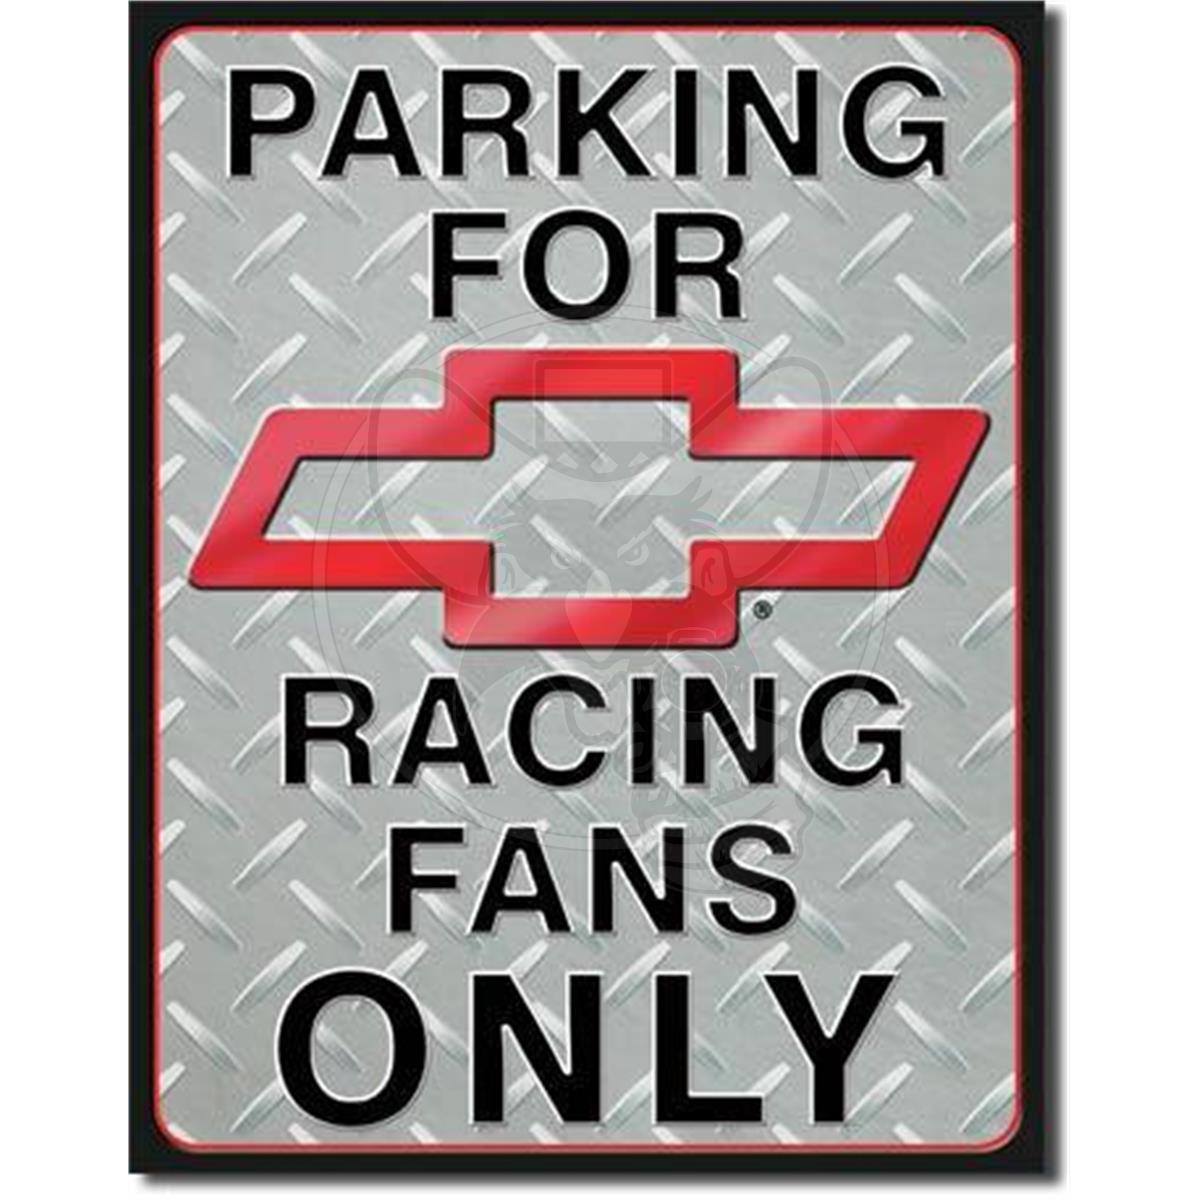 TIN SIGN PARKING BOWTIE FANS ONLY